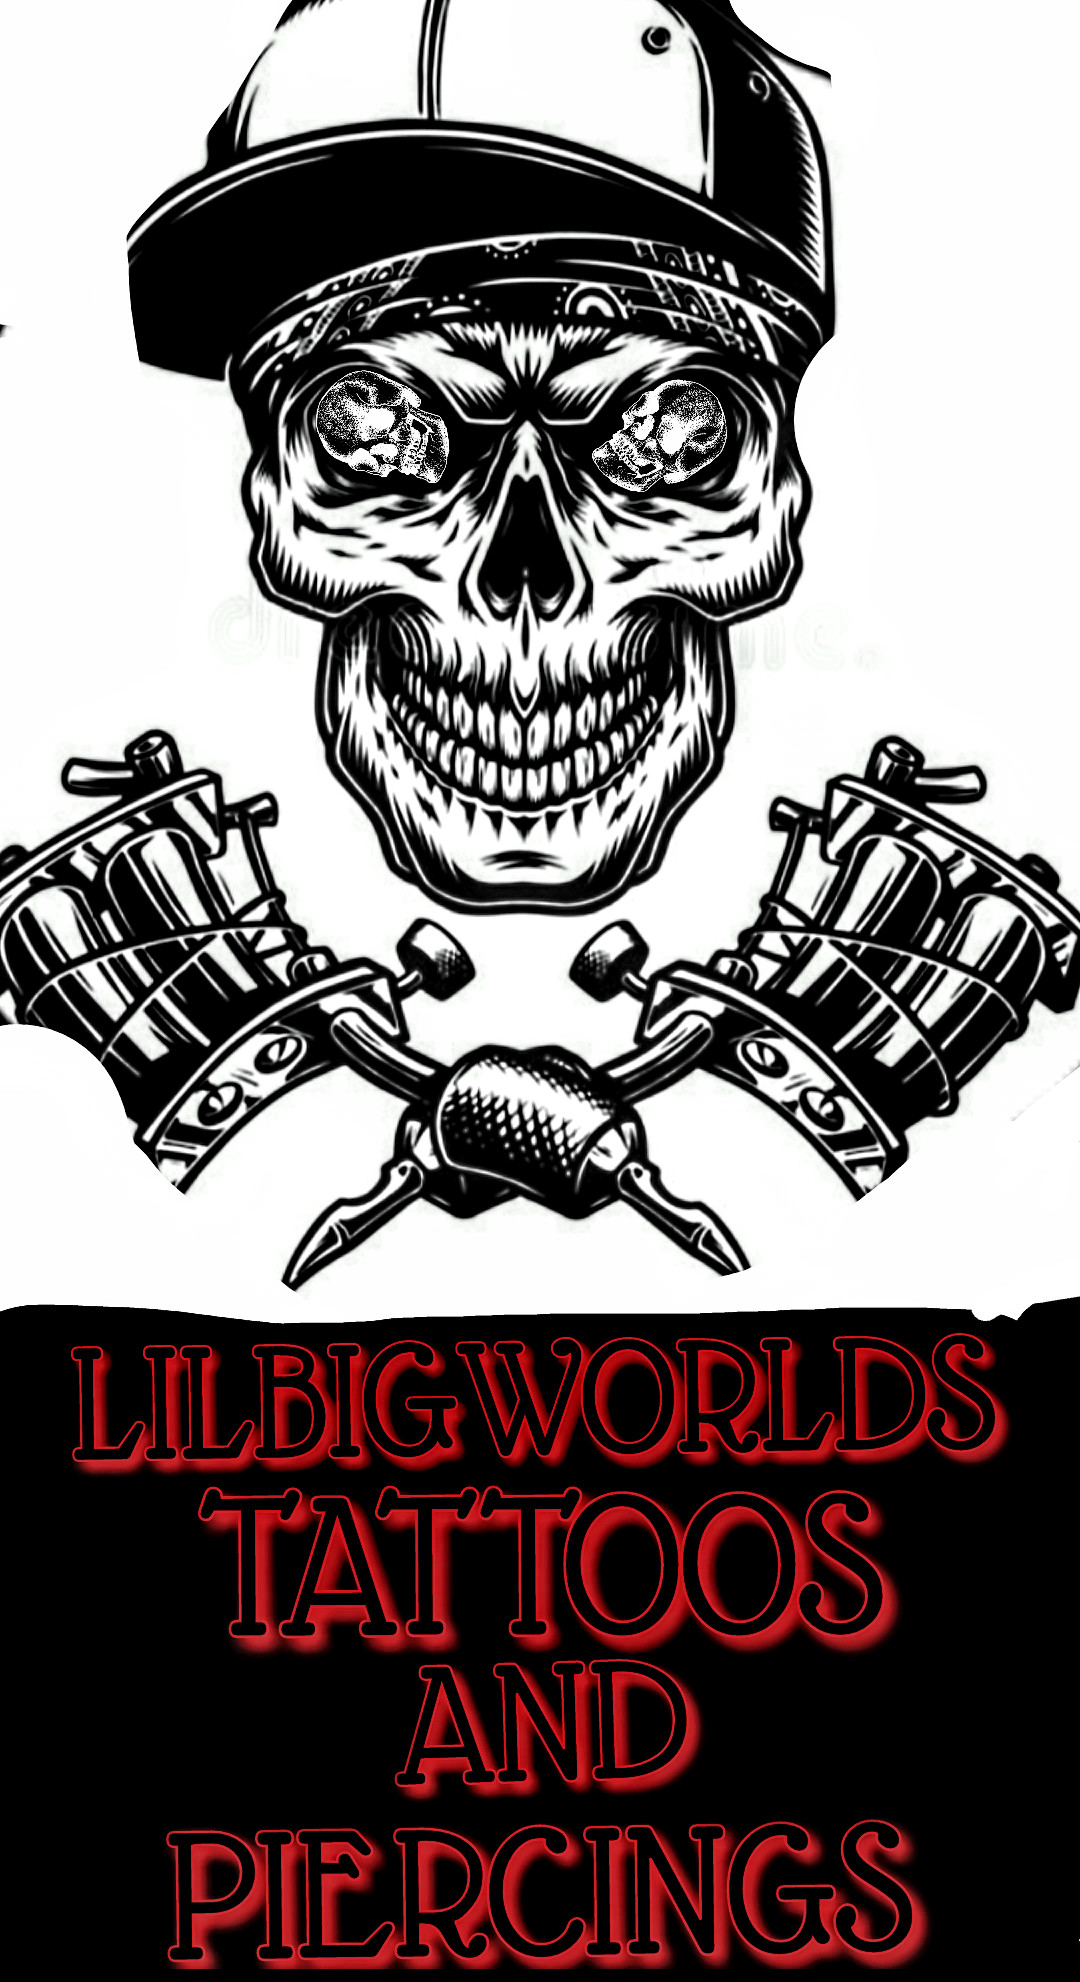 Lilbigworlds Tattoos And Piercings